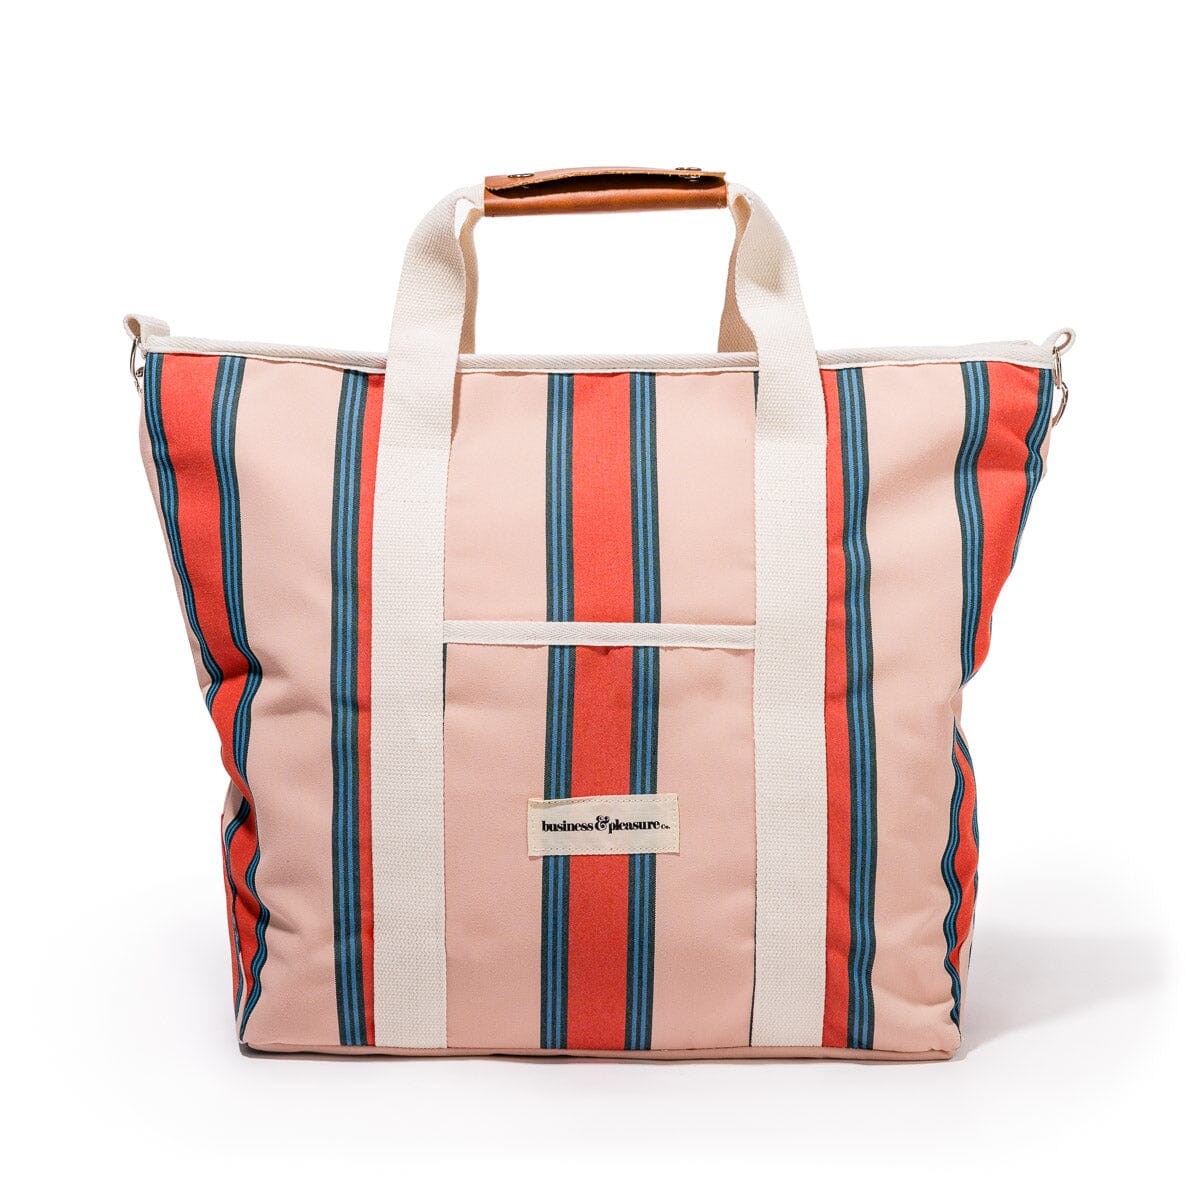 The Cooler Tote Bag - Bistro Dusty Pink Stripe Cooler Tote Business & Pleasure Co 